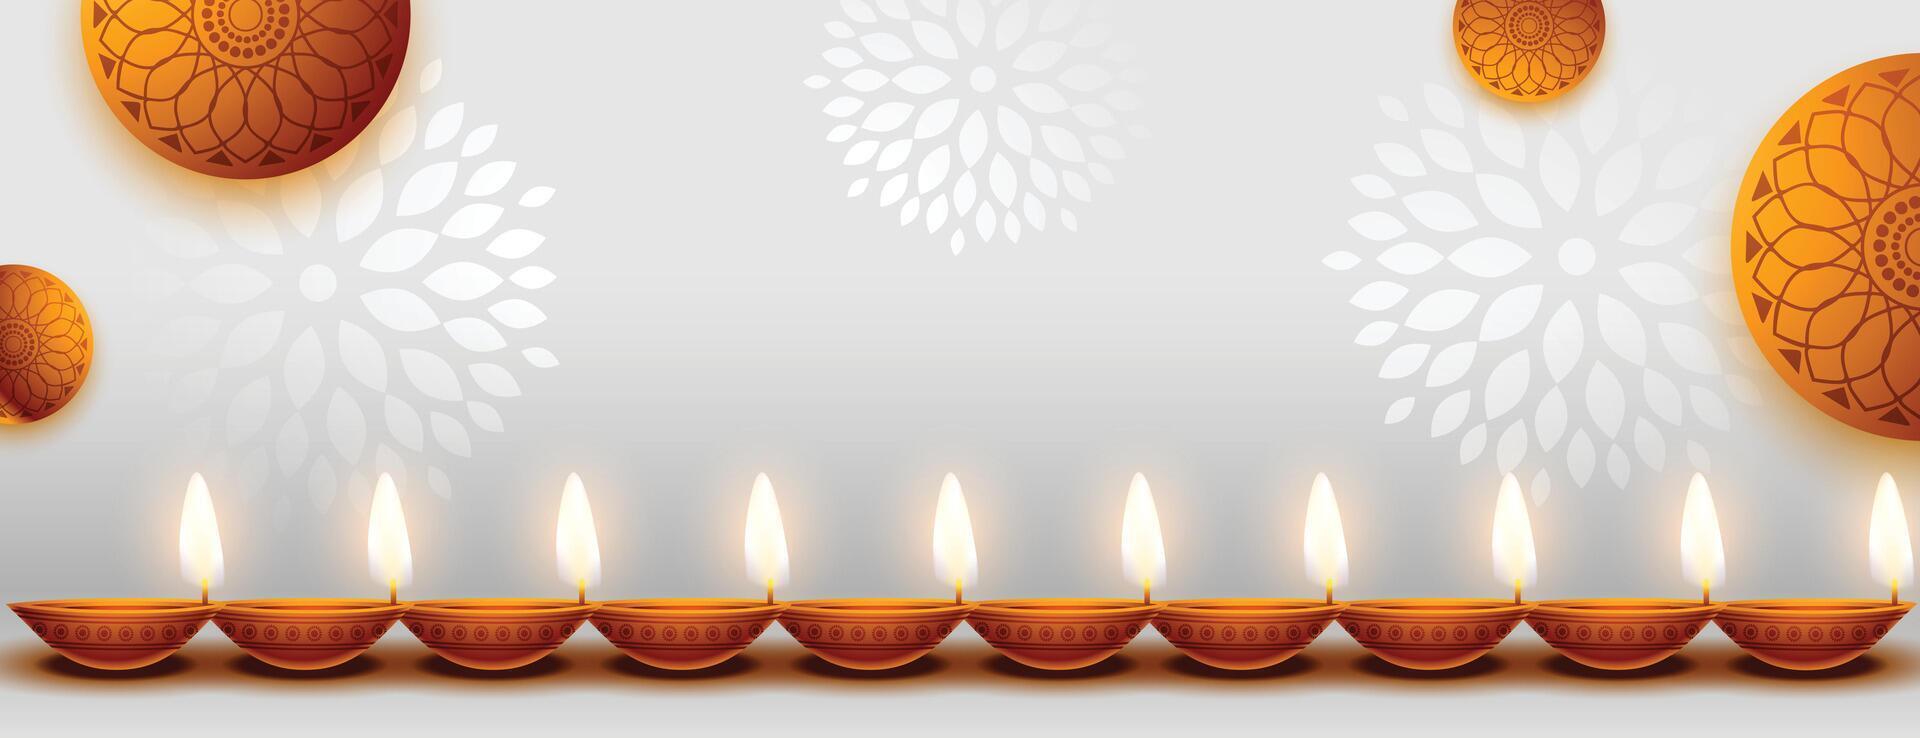 shubh diwali occasion banner with text space and diya decoration vector